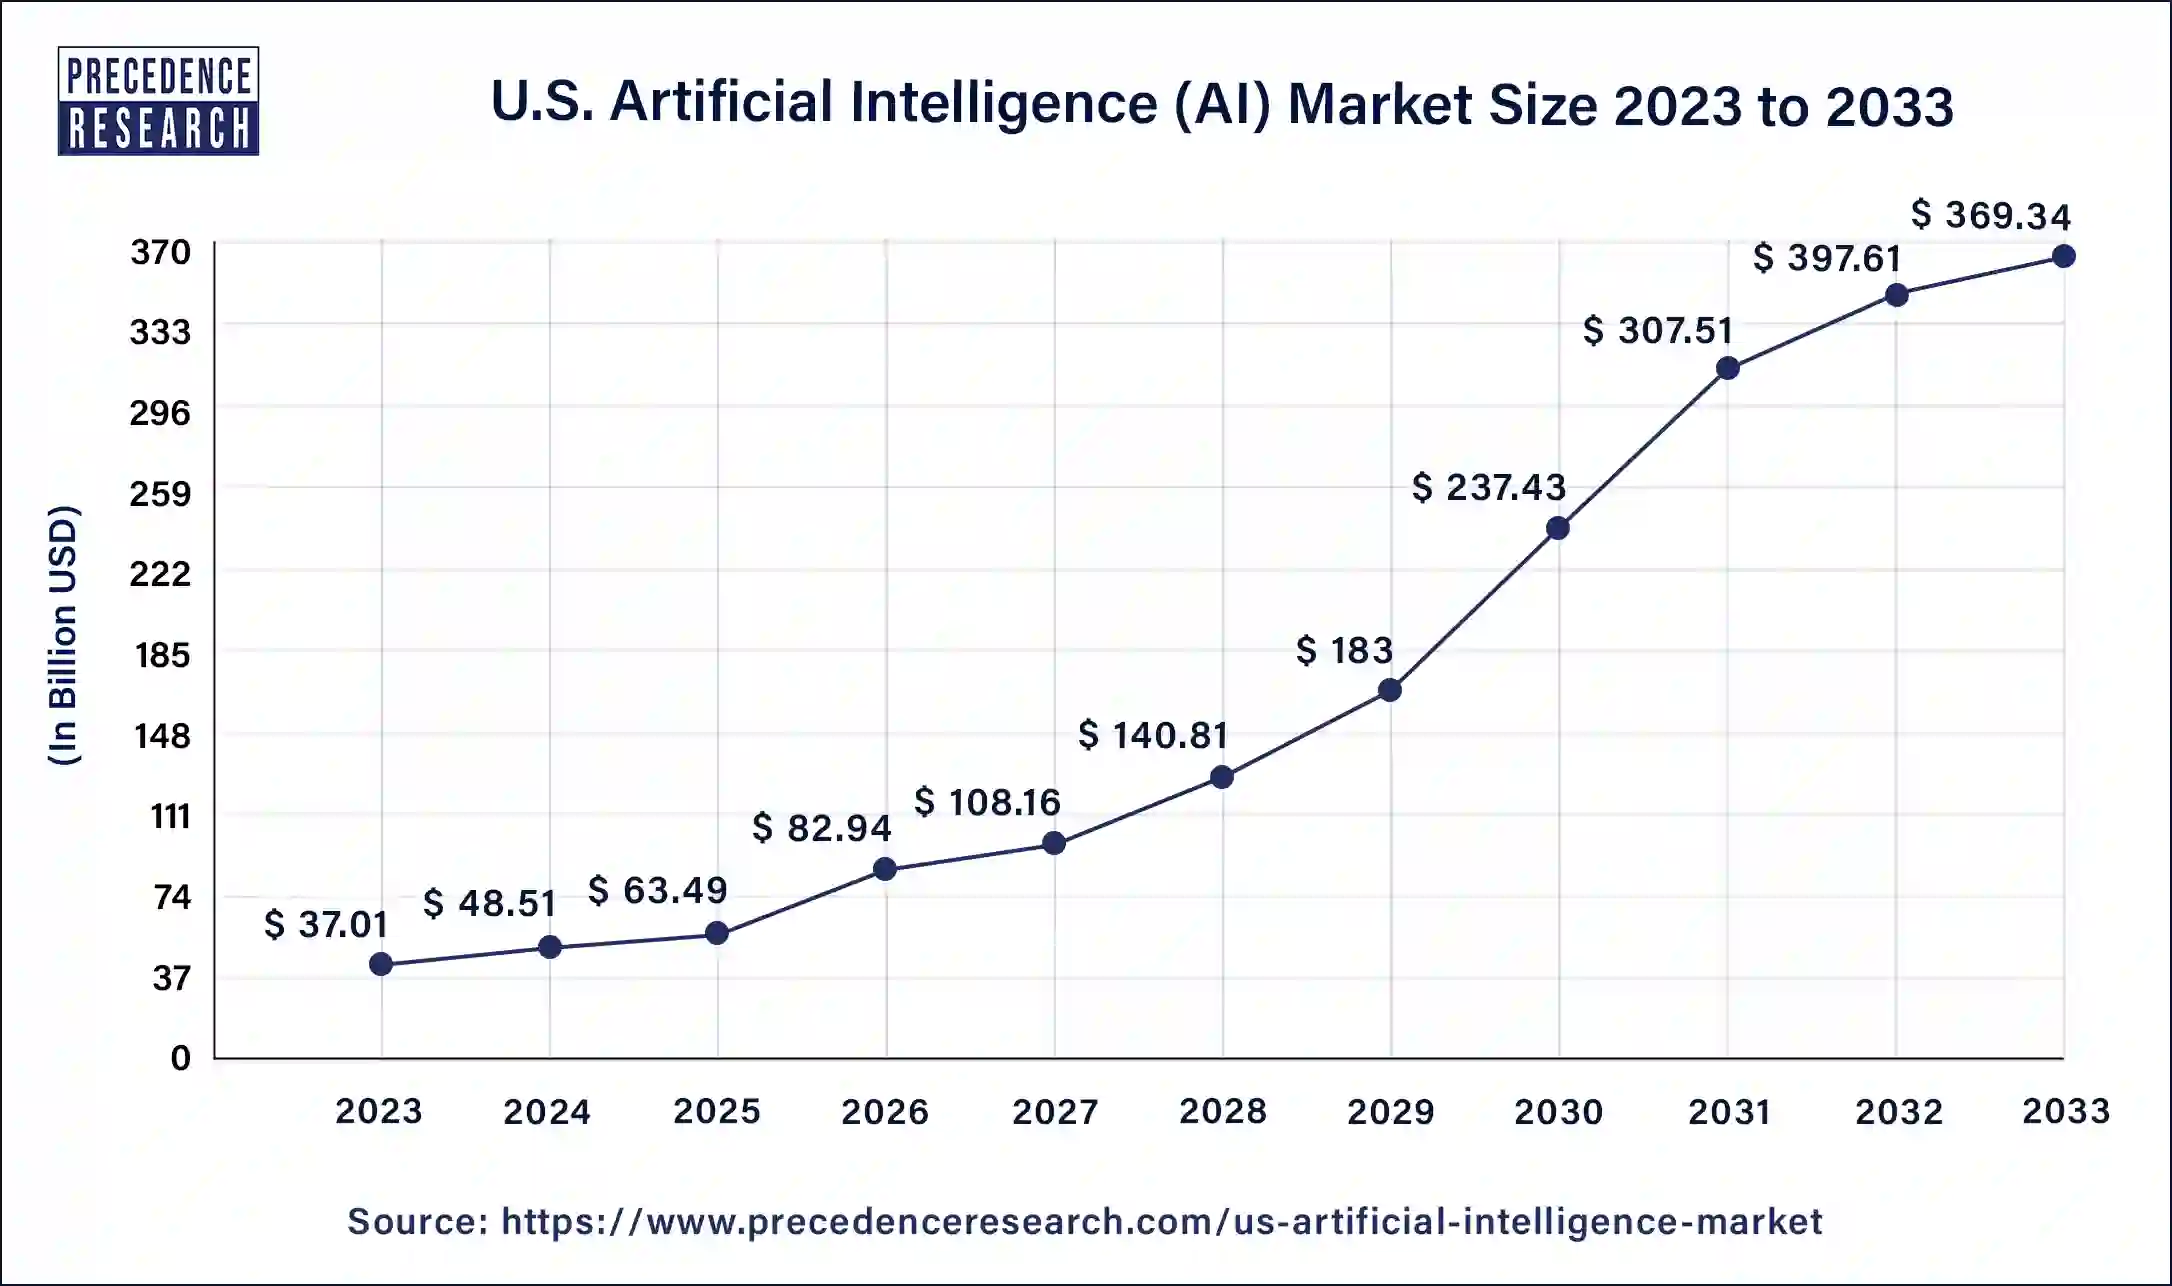 Artificial Intelligence (AI) Market Size in US 2024 to 2033